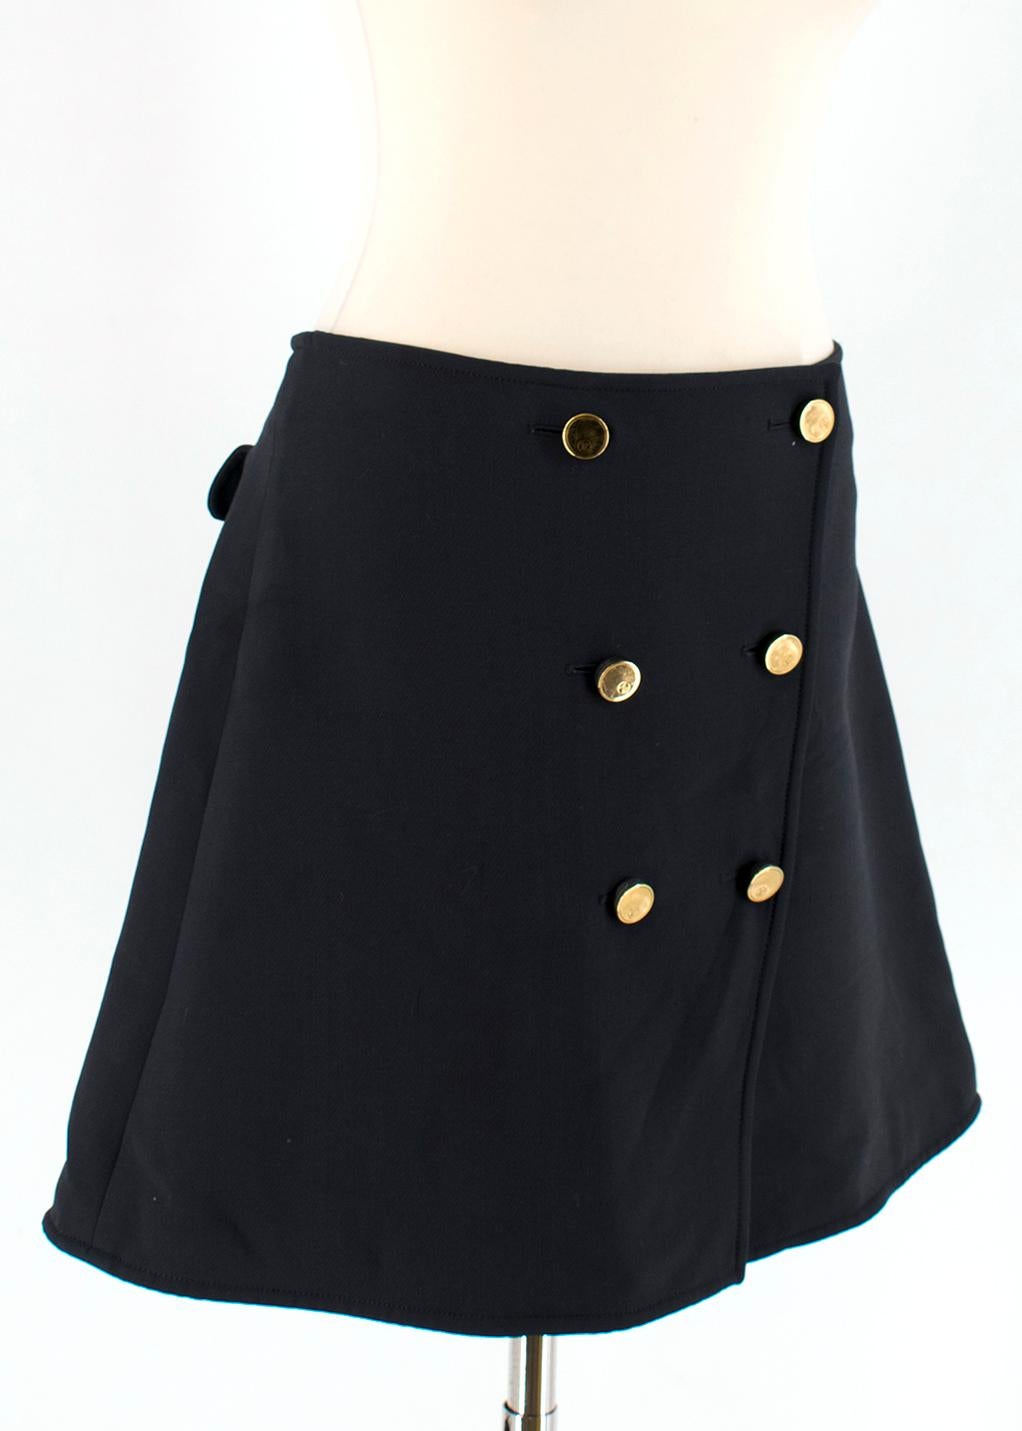 Louis Vuitton front button A-line mini skirt

lining 50% viscose 50% cupro;
double button closure;
six LV golden buttons;
non functional pocket on the back;
Made in Italy 

approx

waist 41 cm
hips 51 cm 
full length 46 cm